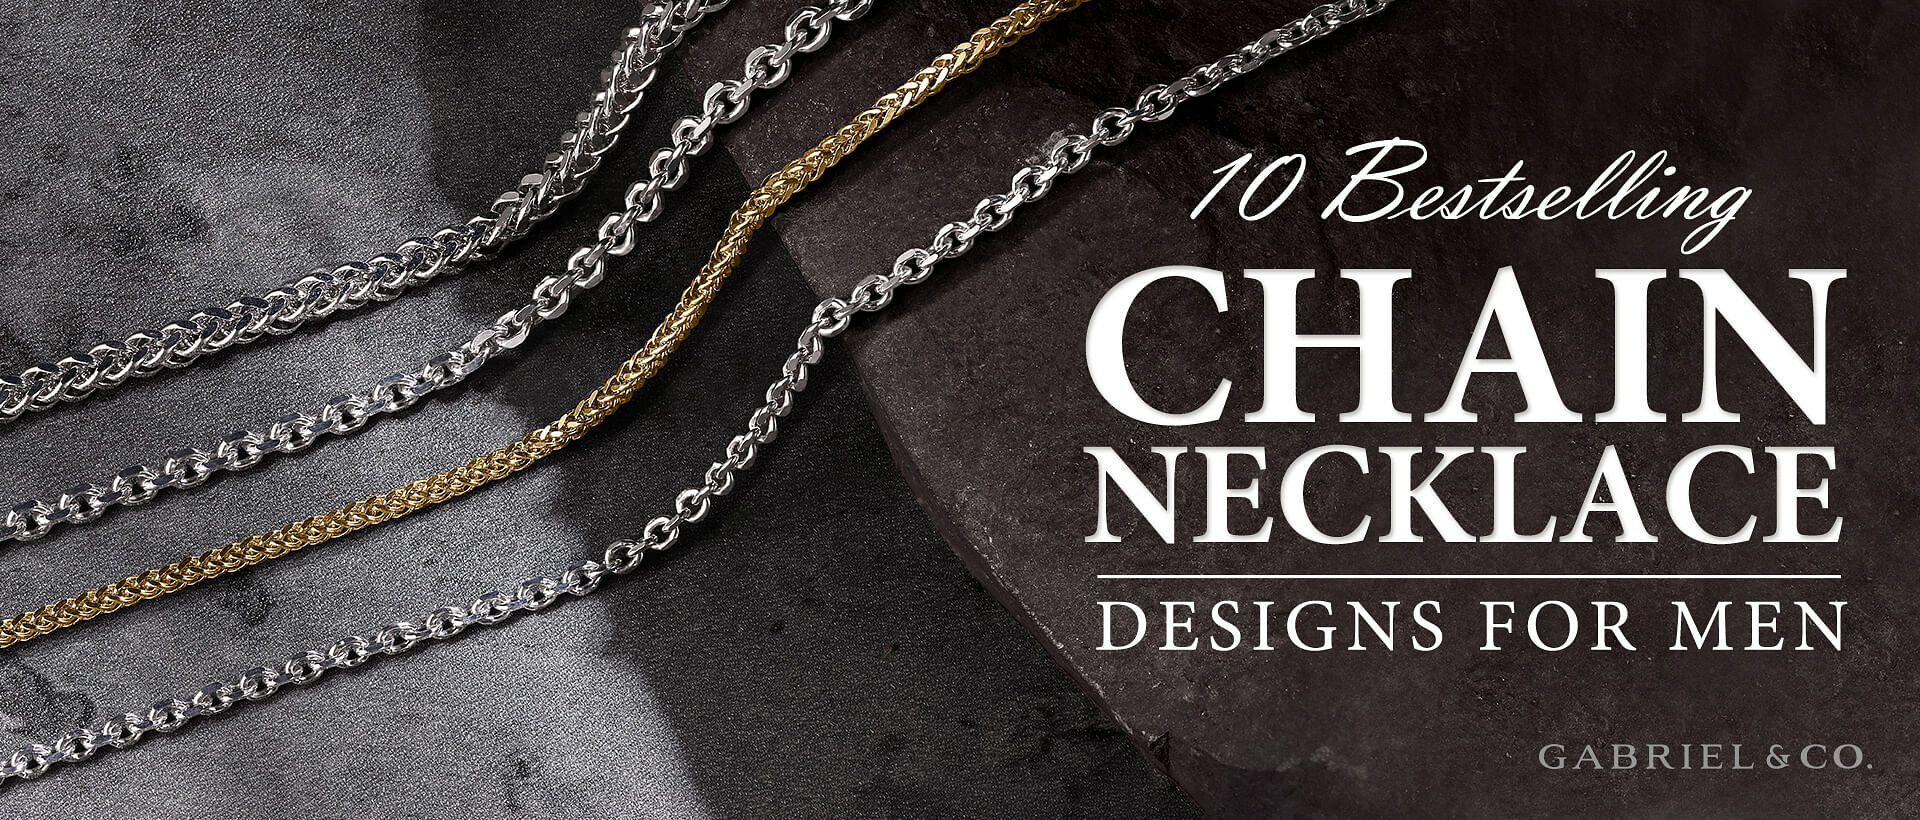 Custom Chains & Necklaces for Men - MYKA